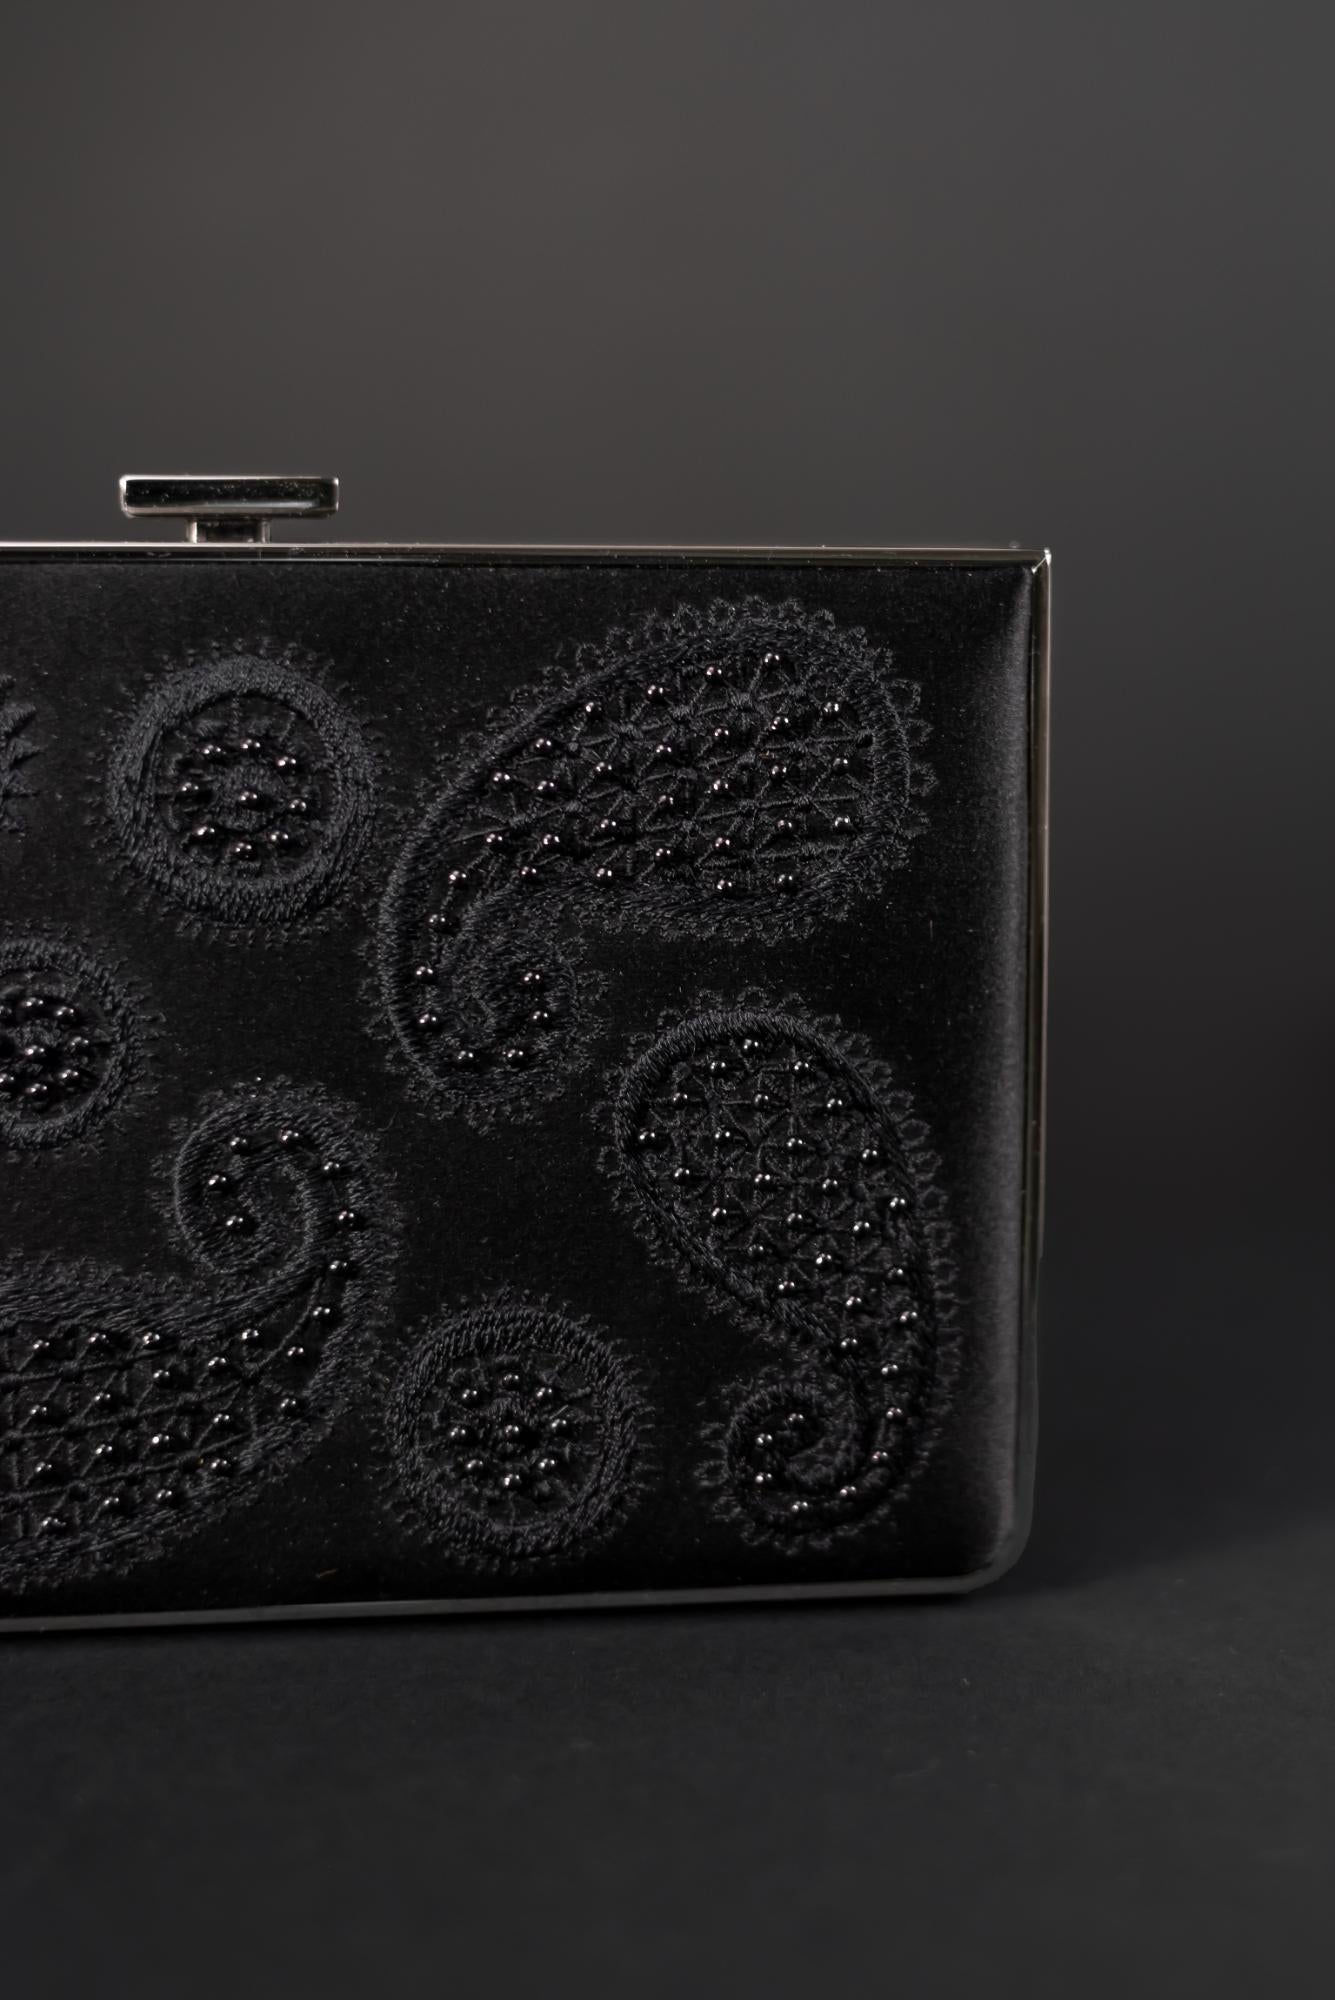 A black purse with a paisley design from The Bella Rosa Collection.